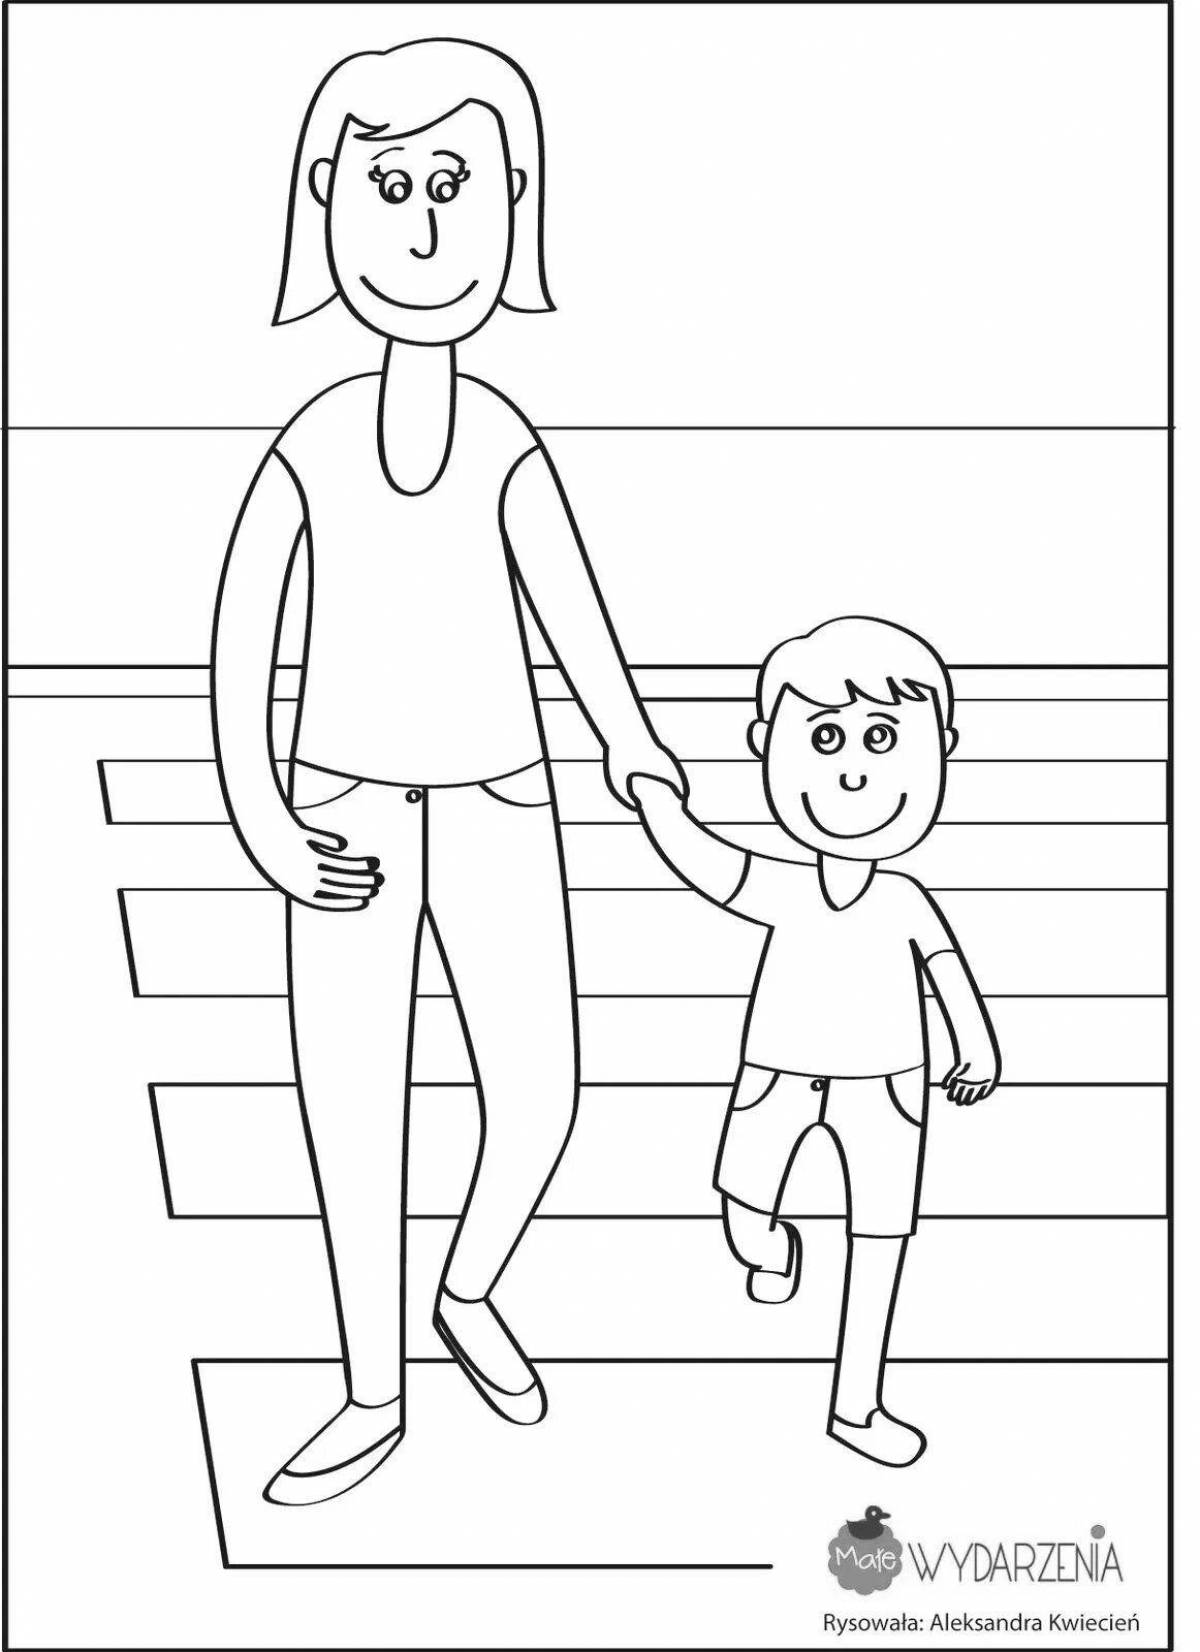 Creative coloring pages of my dad and me for safer roads